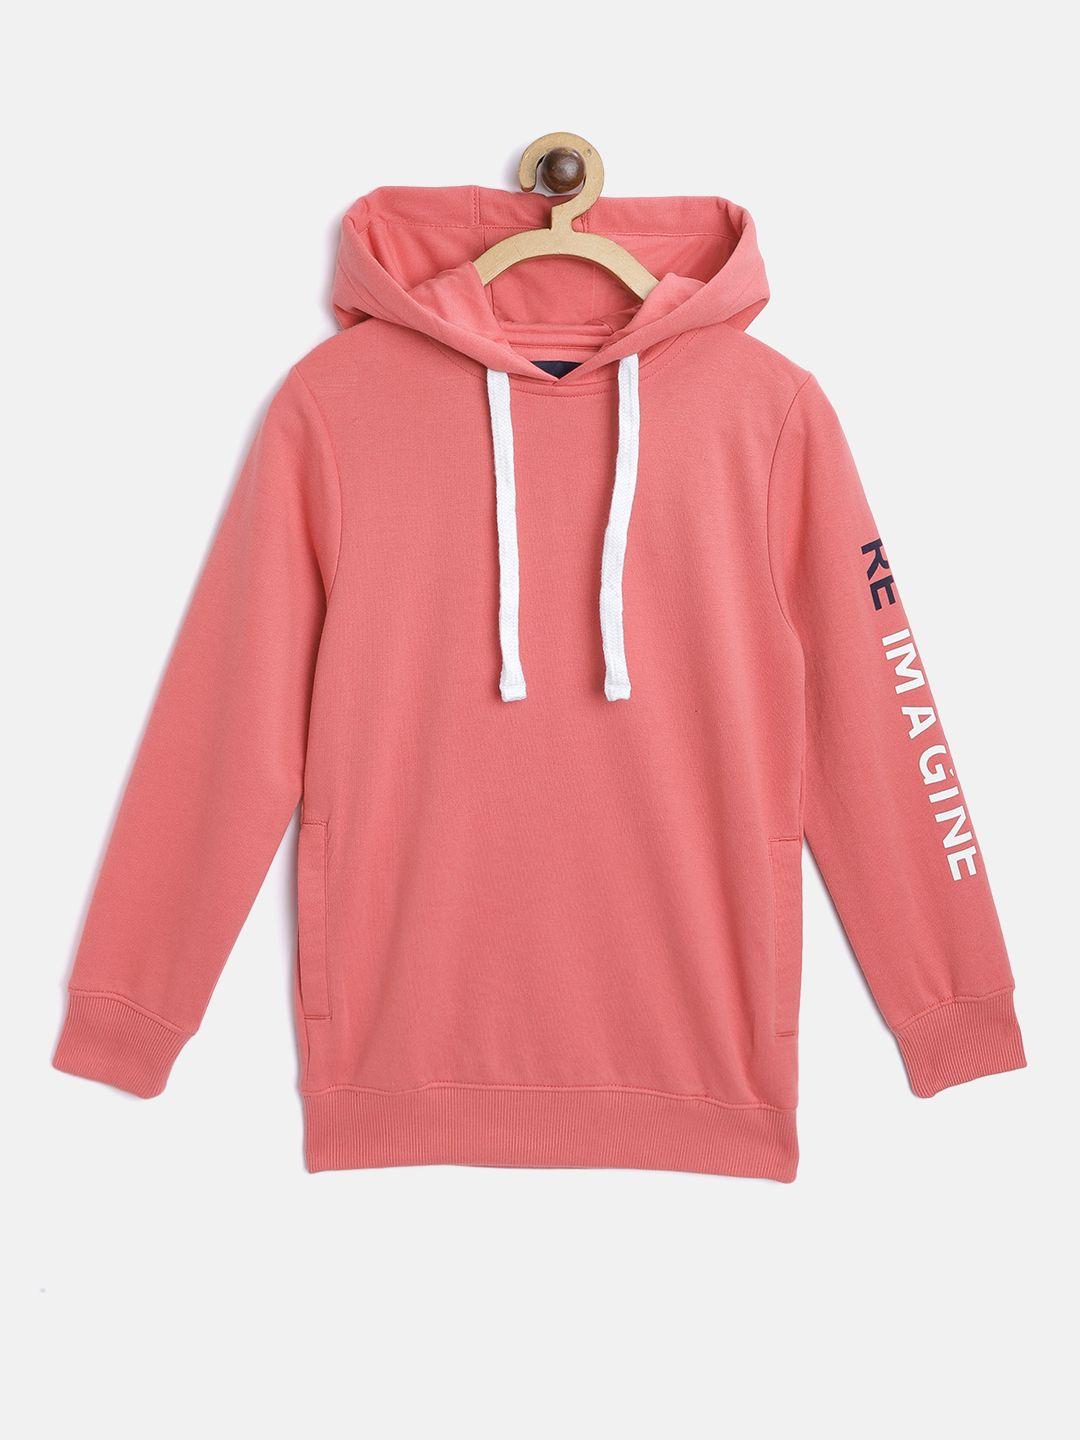 m&h-juniors-boys-pink-solid-hooded-sweatshirt-with-typography-print-detail